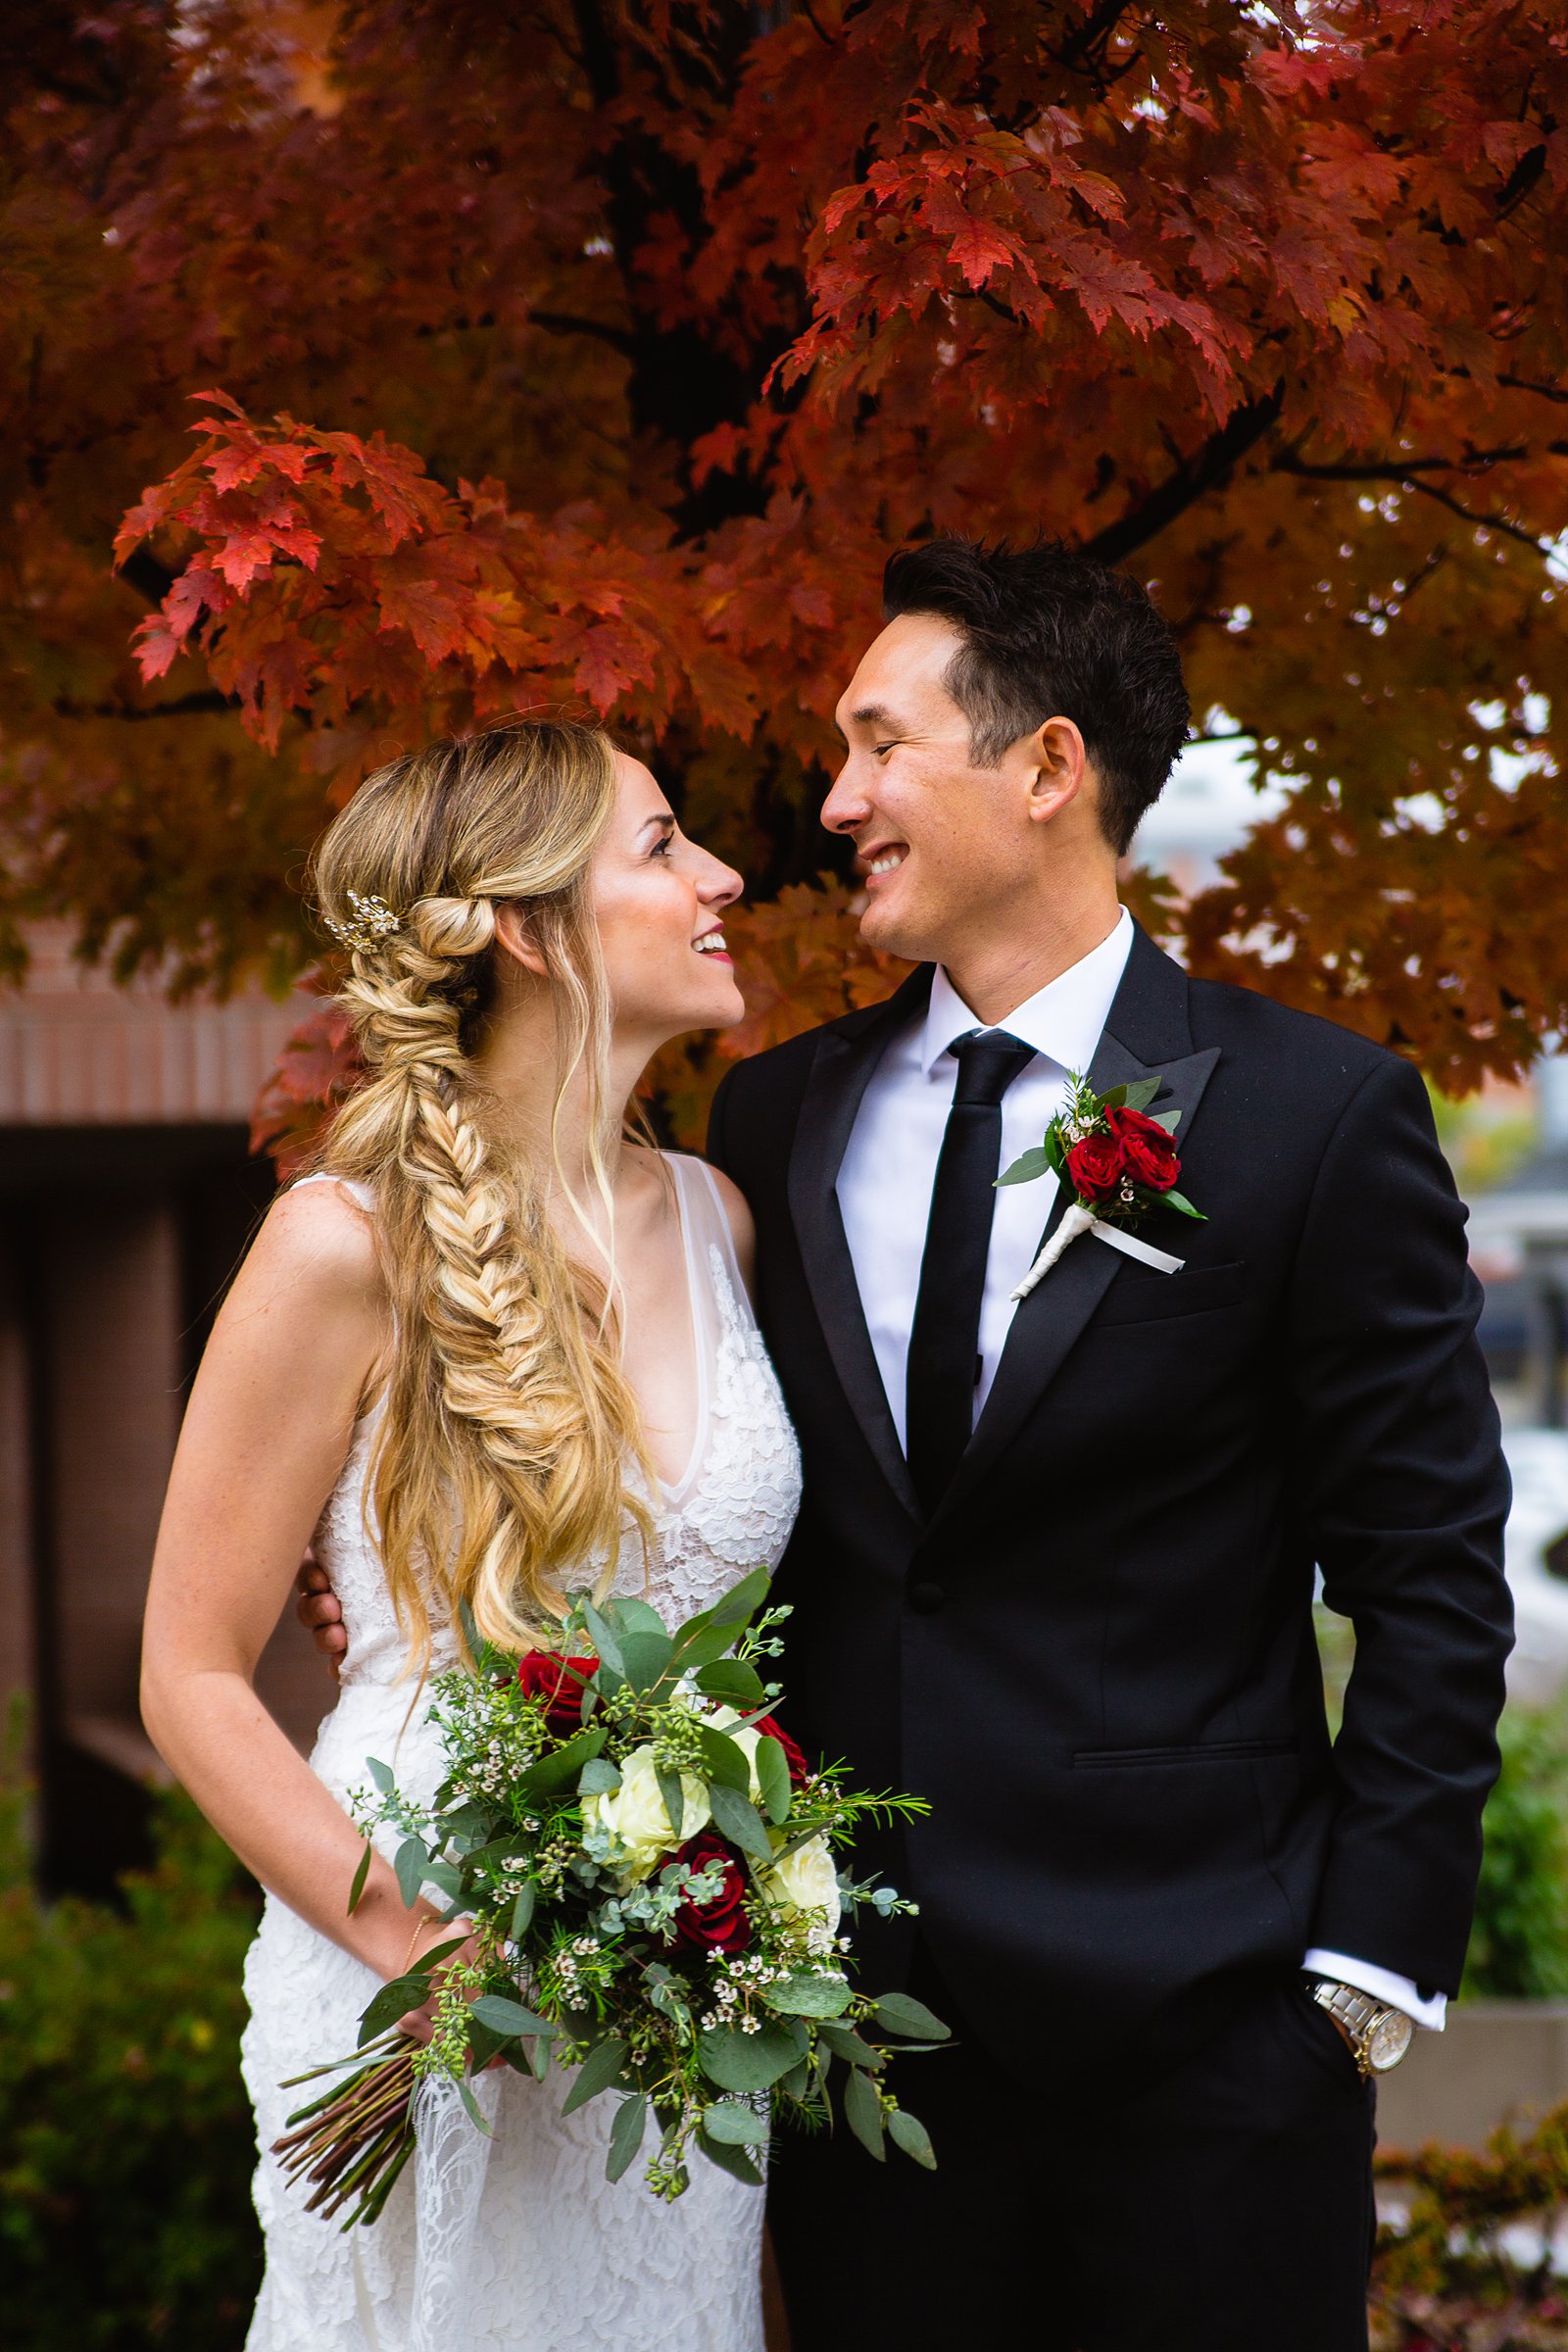 Bride and groom laughing together during their downtown Flagstaff wedding by Flagstaff wedding photographer PMA Photography.